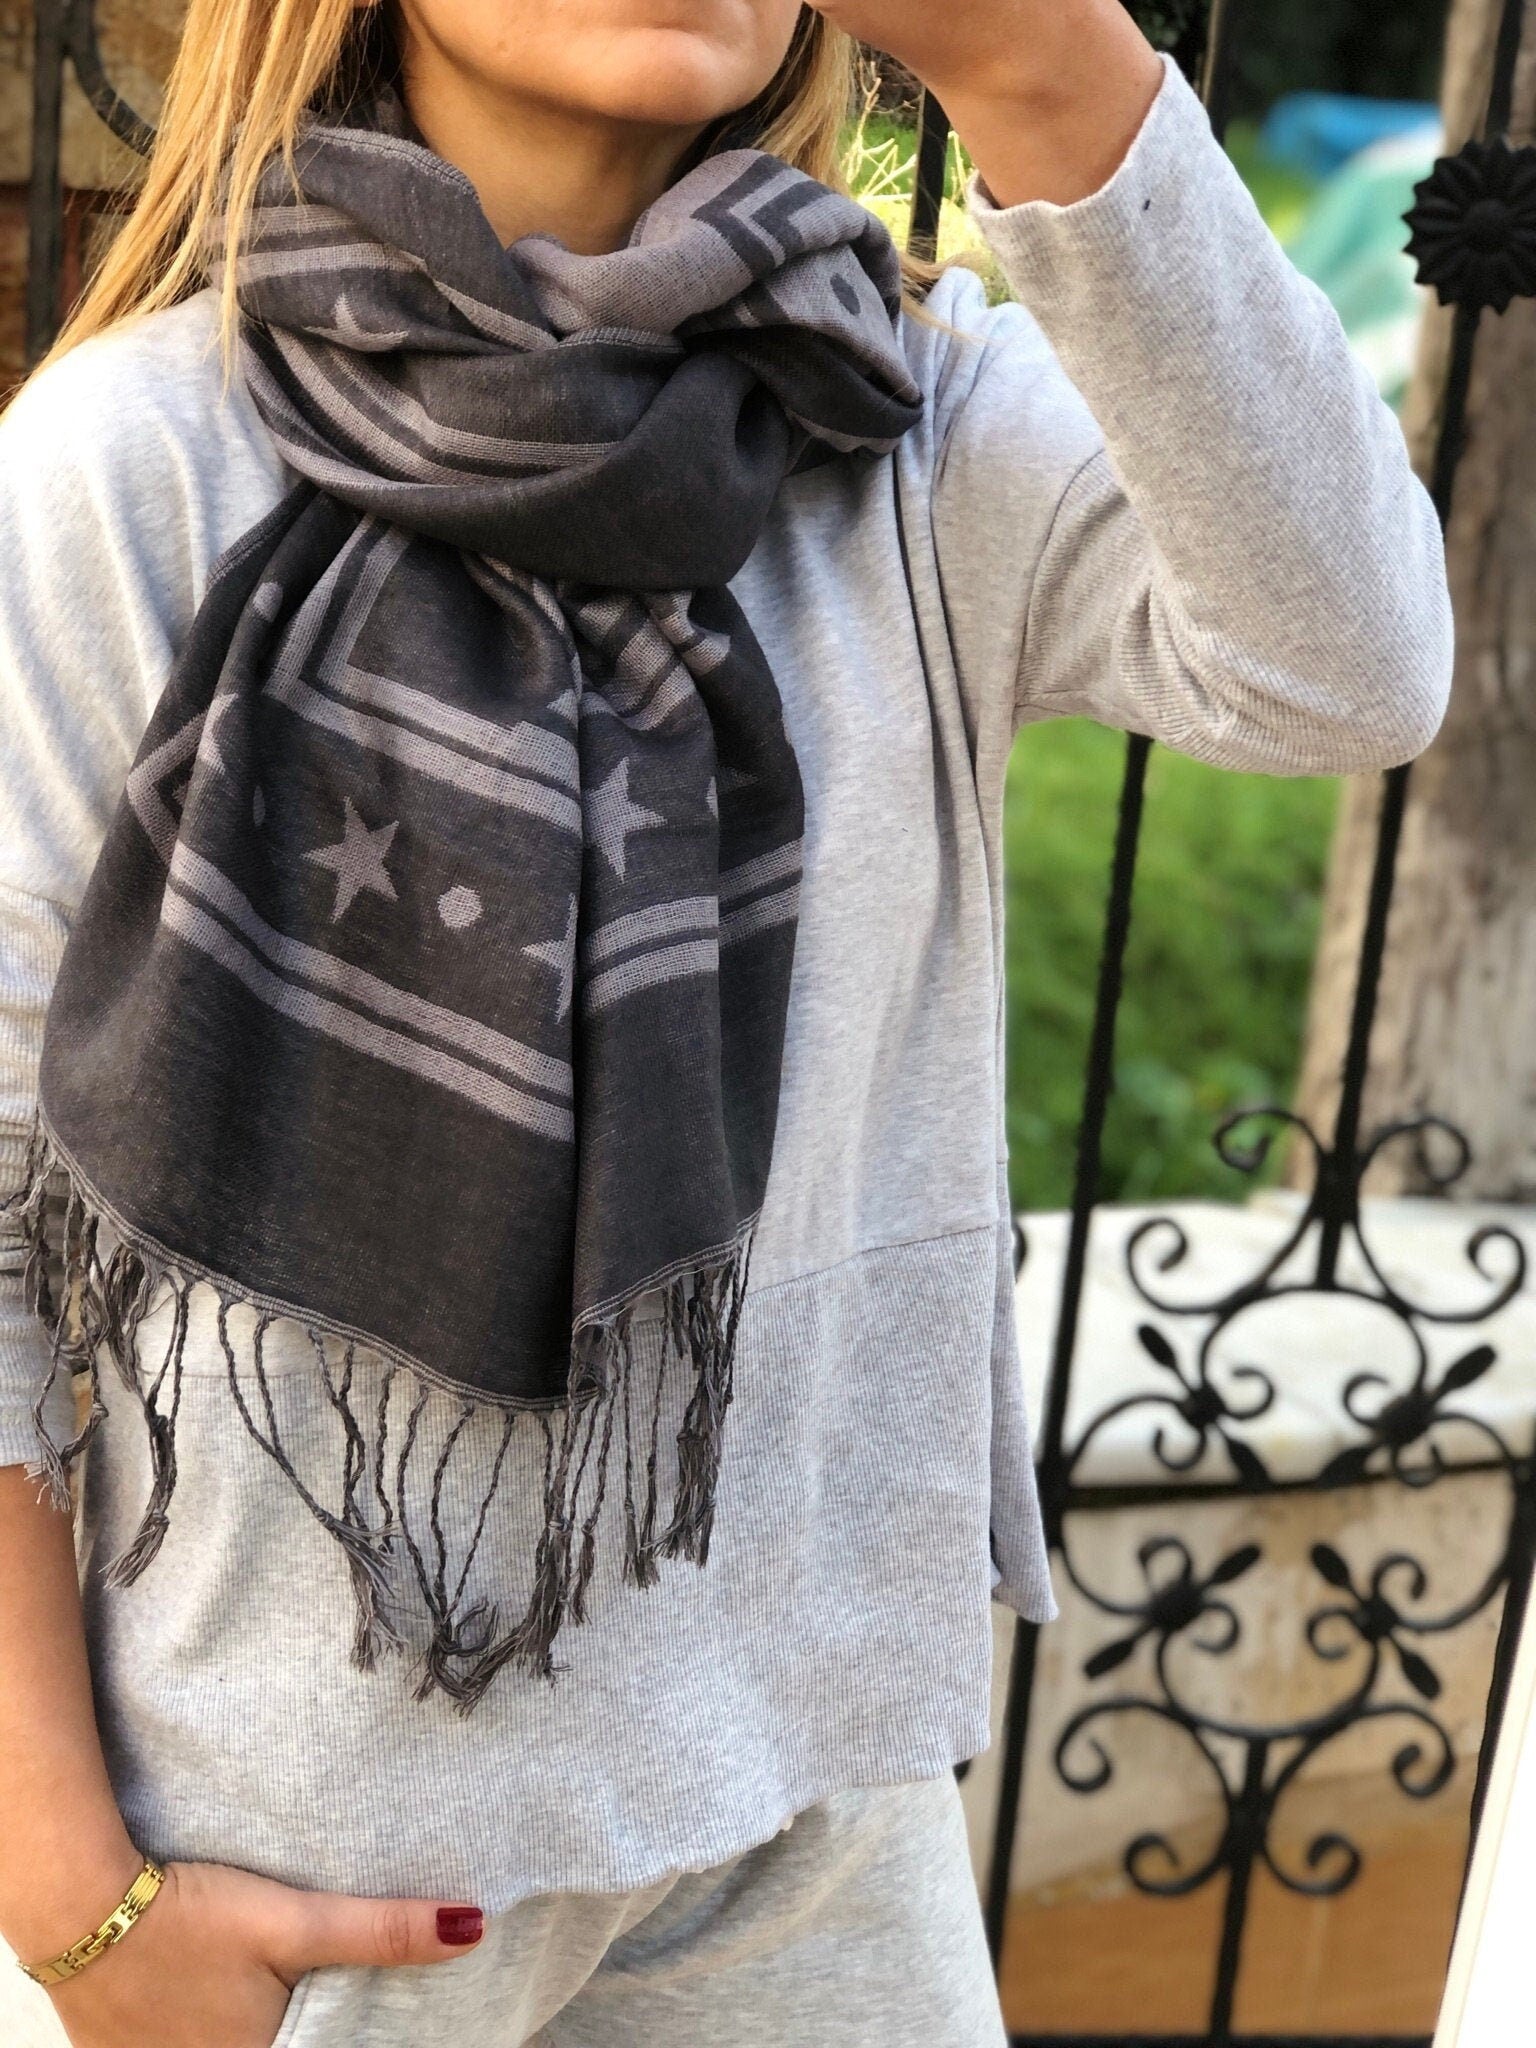 Stay cozy with this Anthracite Gray Acrylic Cotton Scarf, perfect for chilly spring and autumn days.